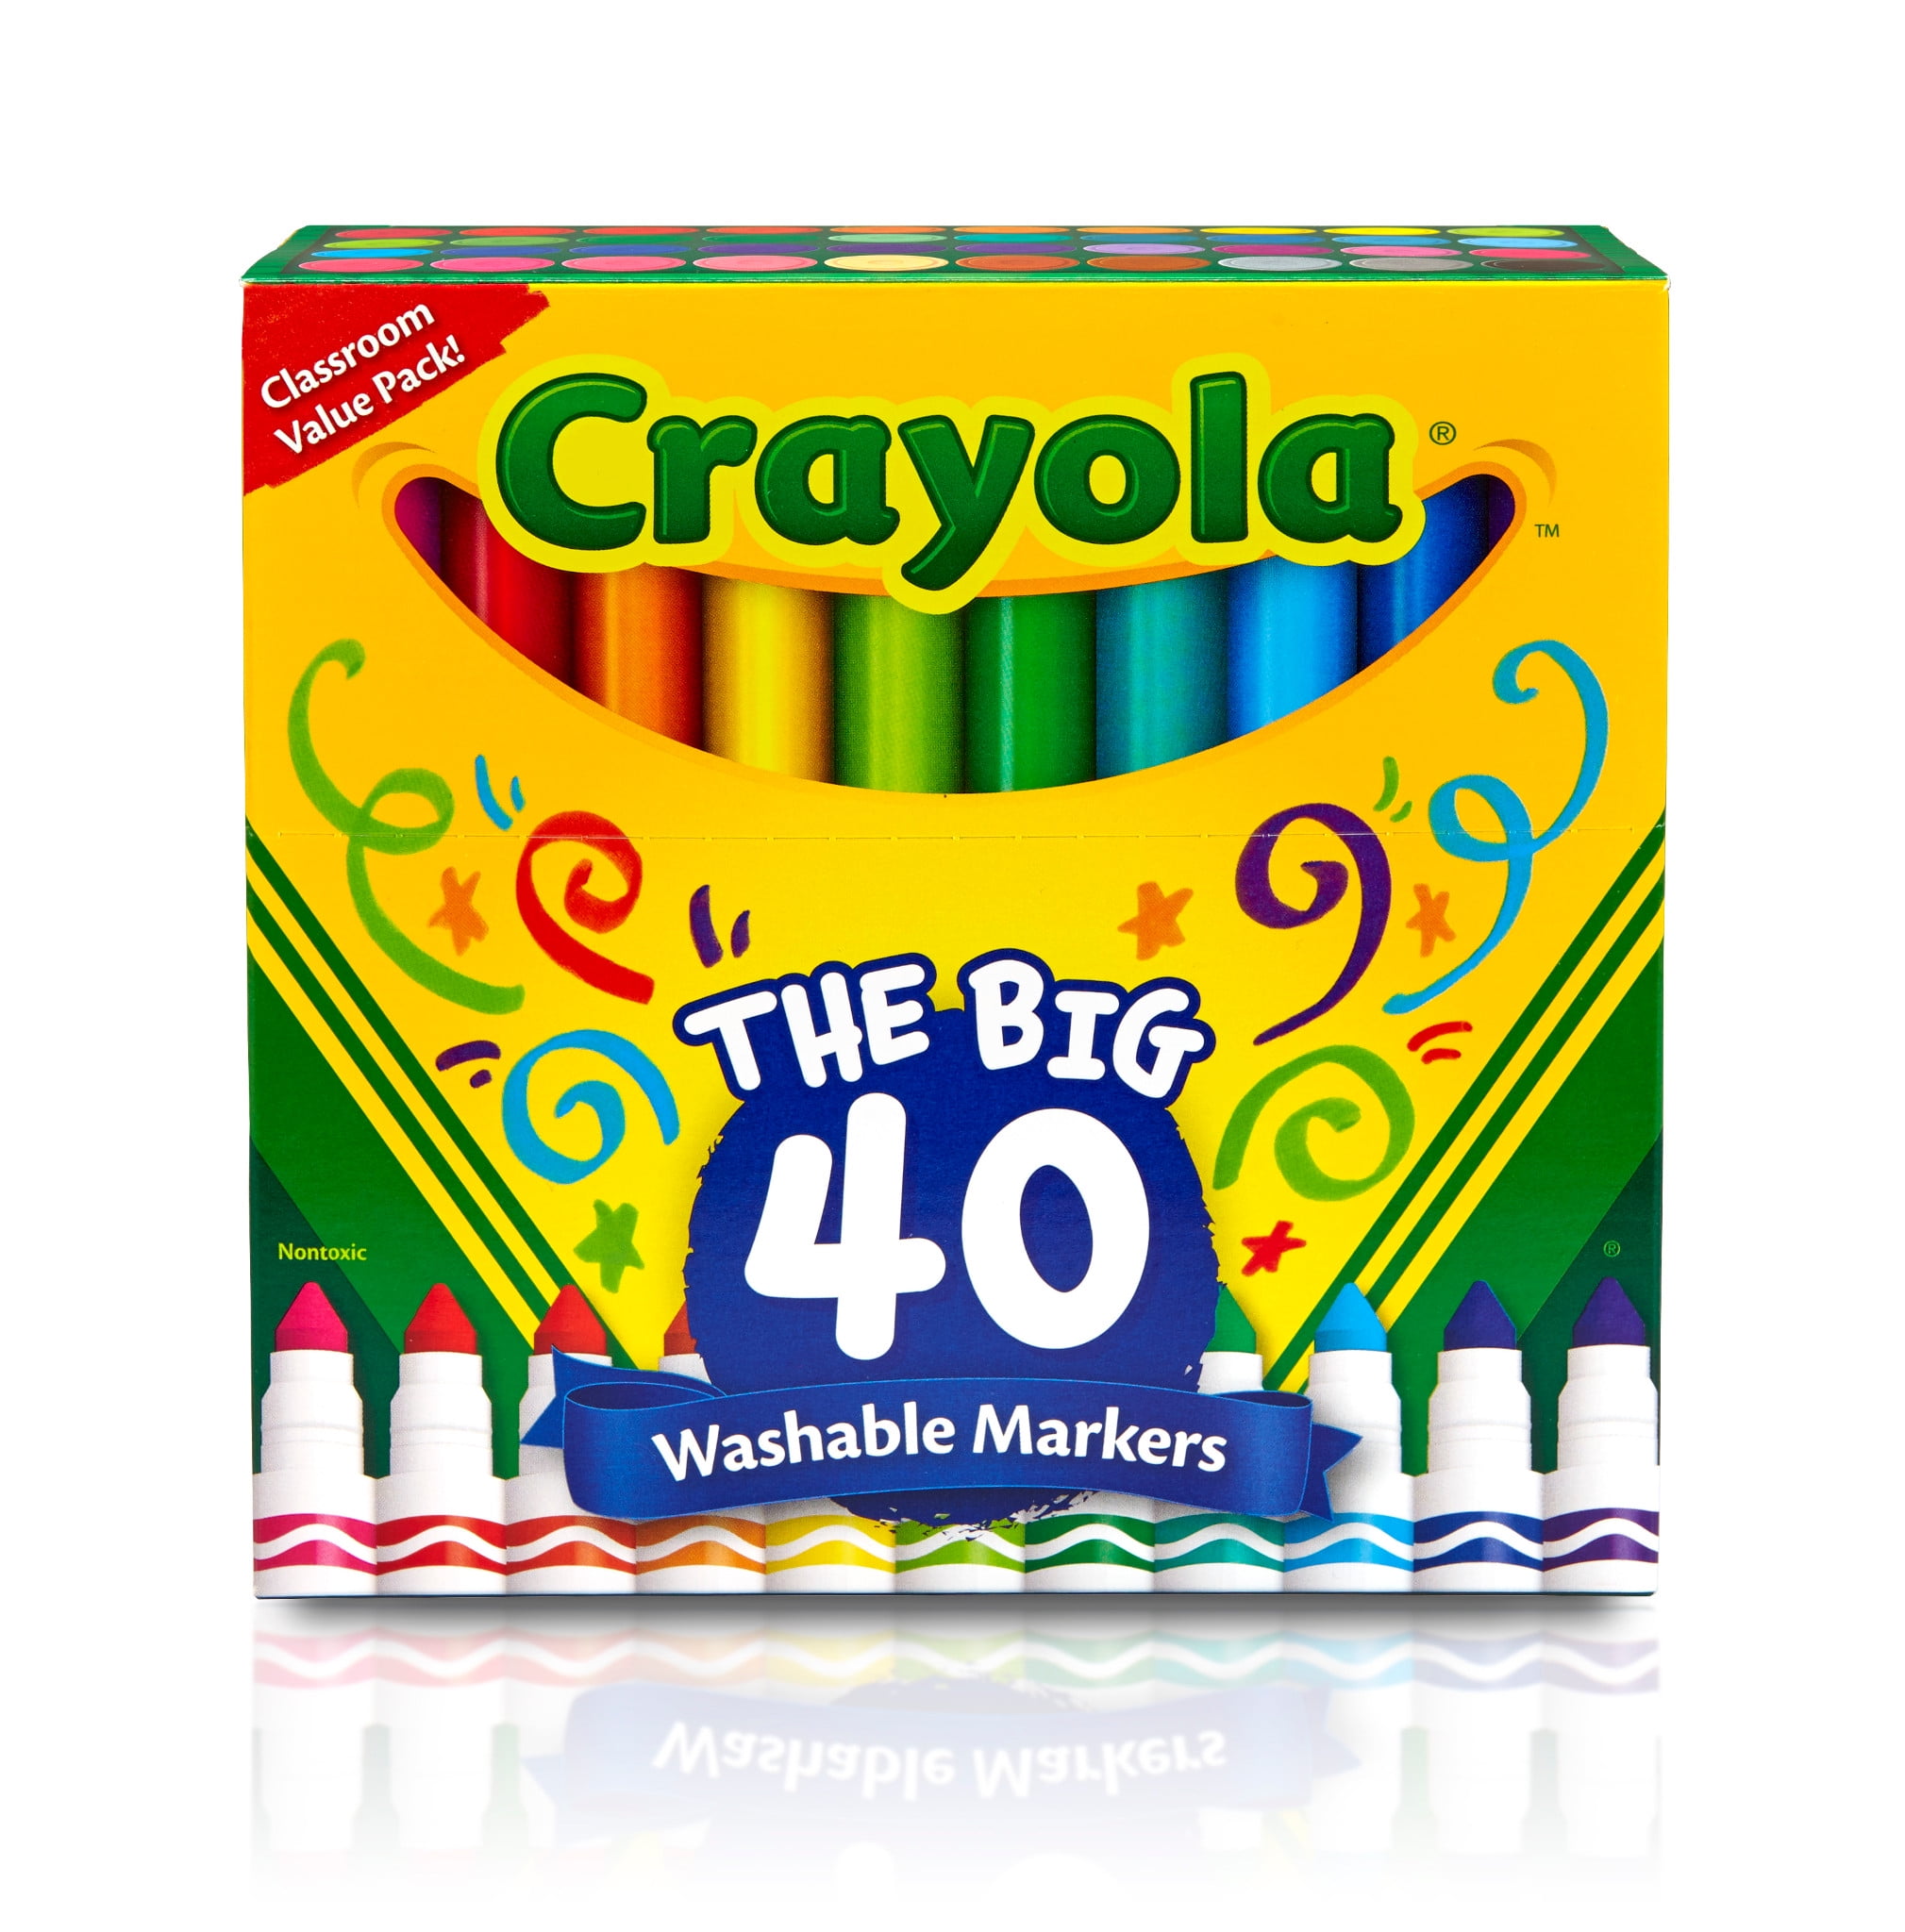 Washable Crayola My First Wash Tripod Grip Markers 4 Gift for Boys and Girls Stocking Stuffers Holiday Gifting Arts and Crafts Kids Easter Gifting for Girls and Boys 5,6 and Up Easter Basket Stuffers Ages 3